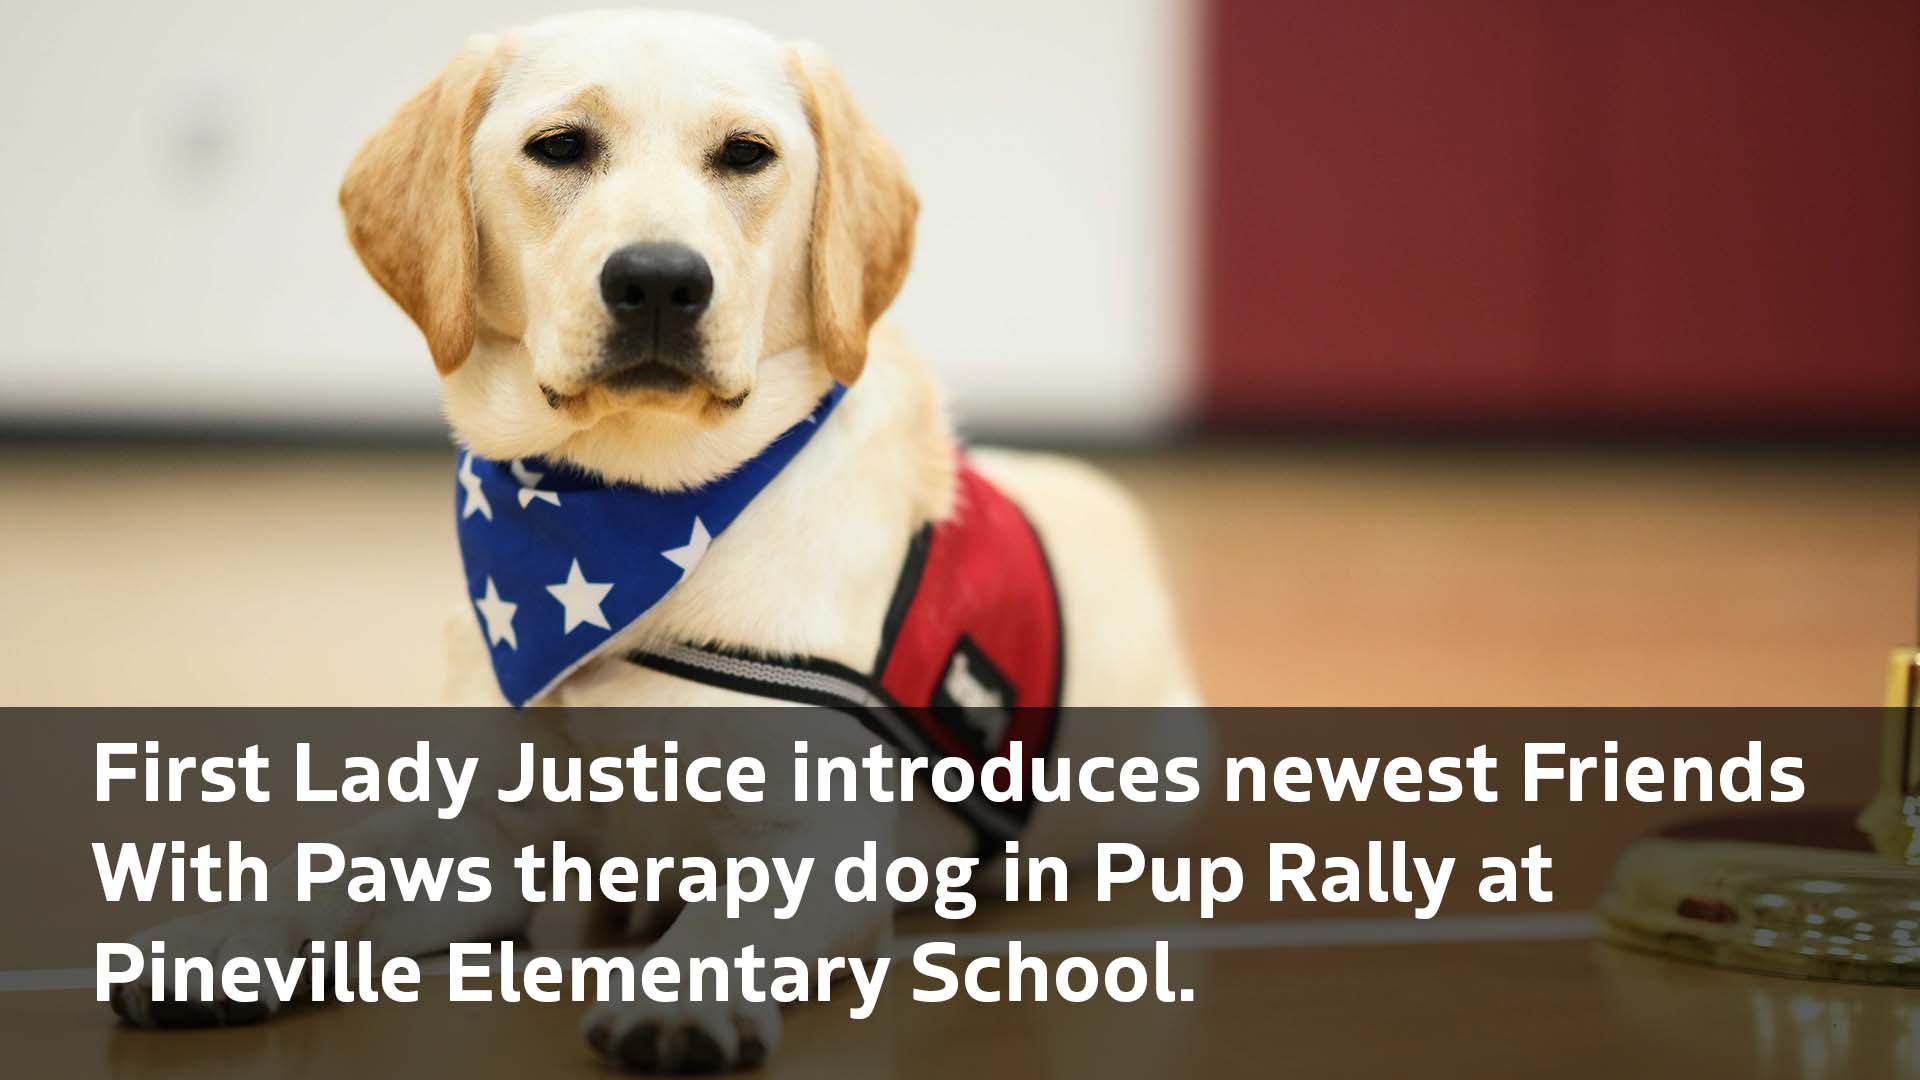 A very good girl: U of L Health celebrates therapy dog on National